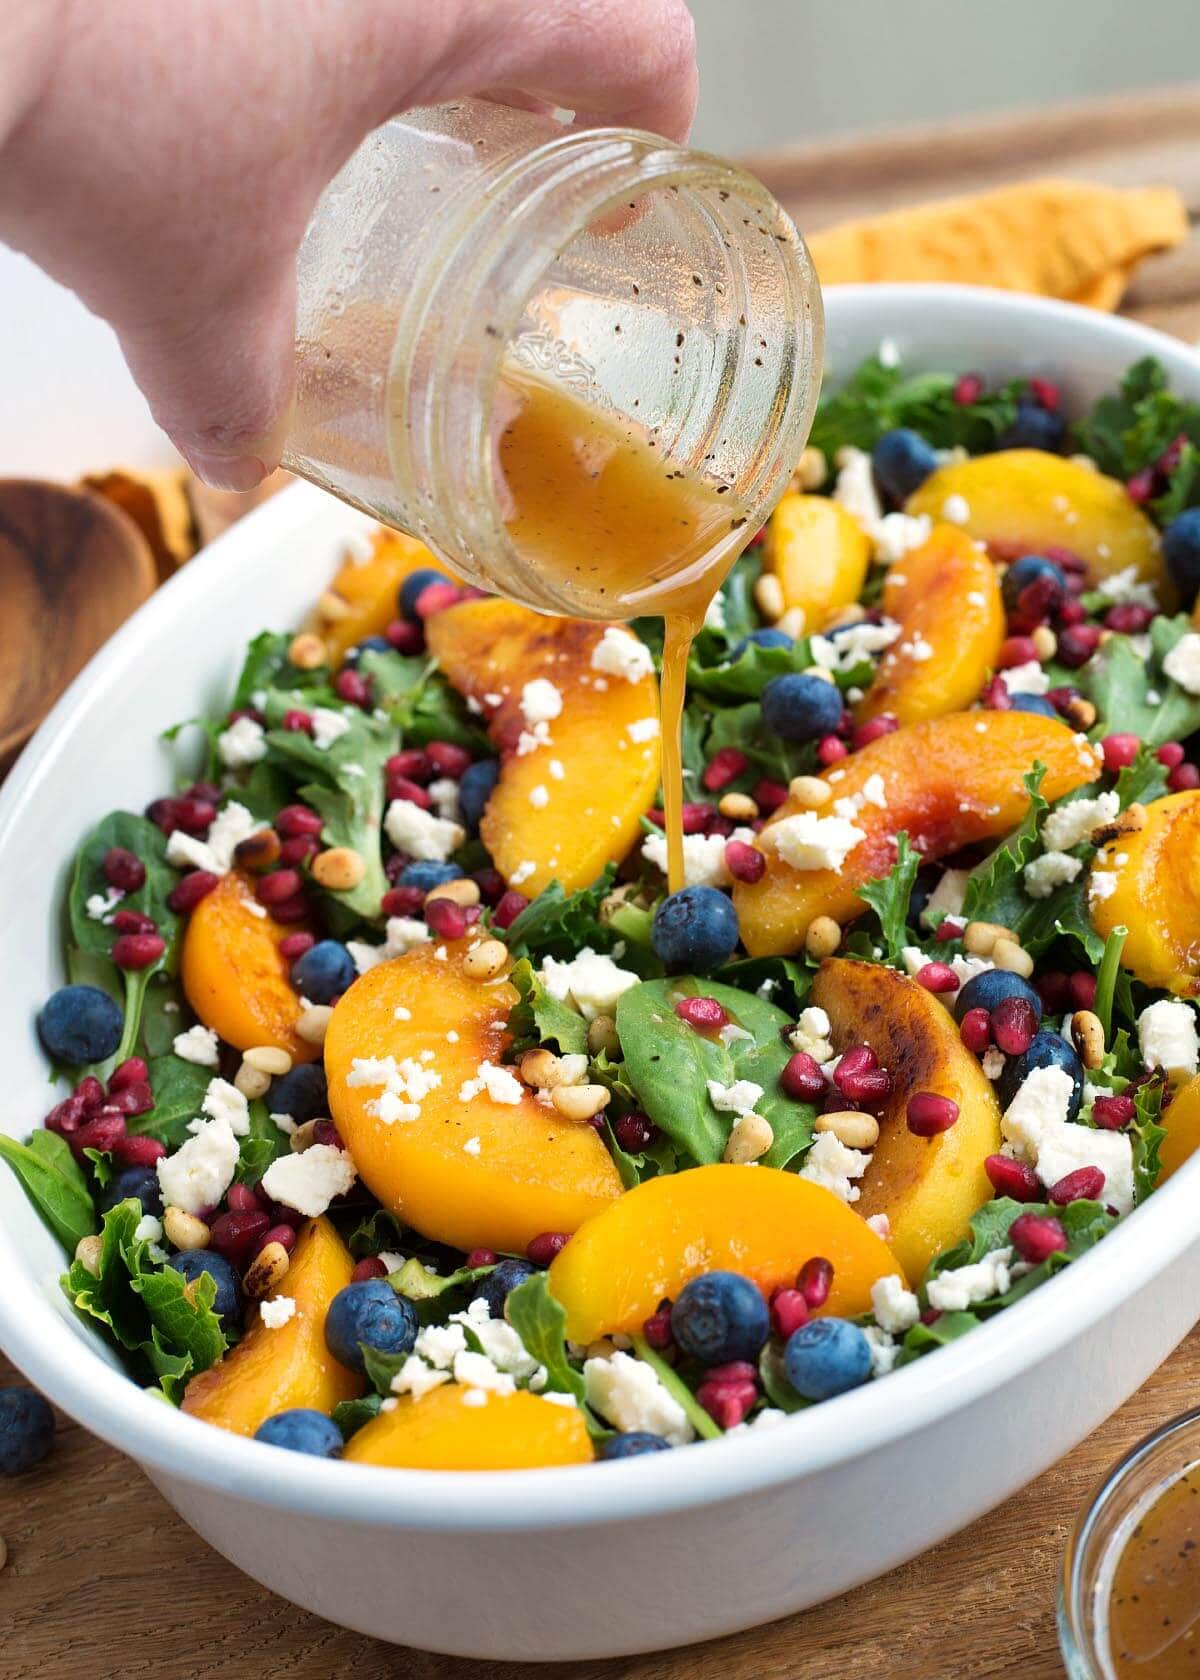 Peach Salad in a white oval dish with hand pouring dressing on it